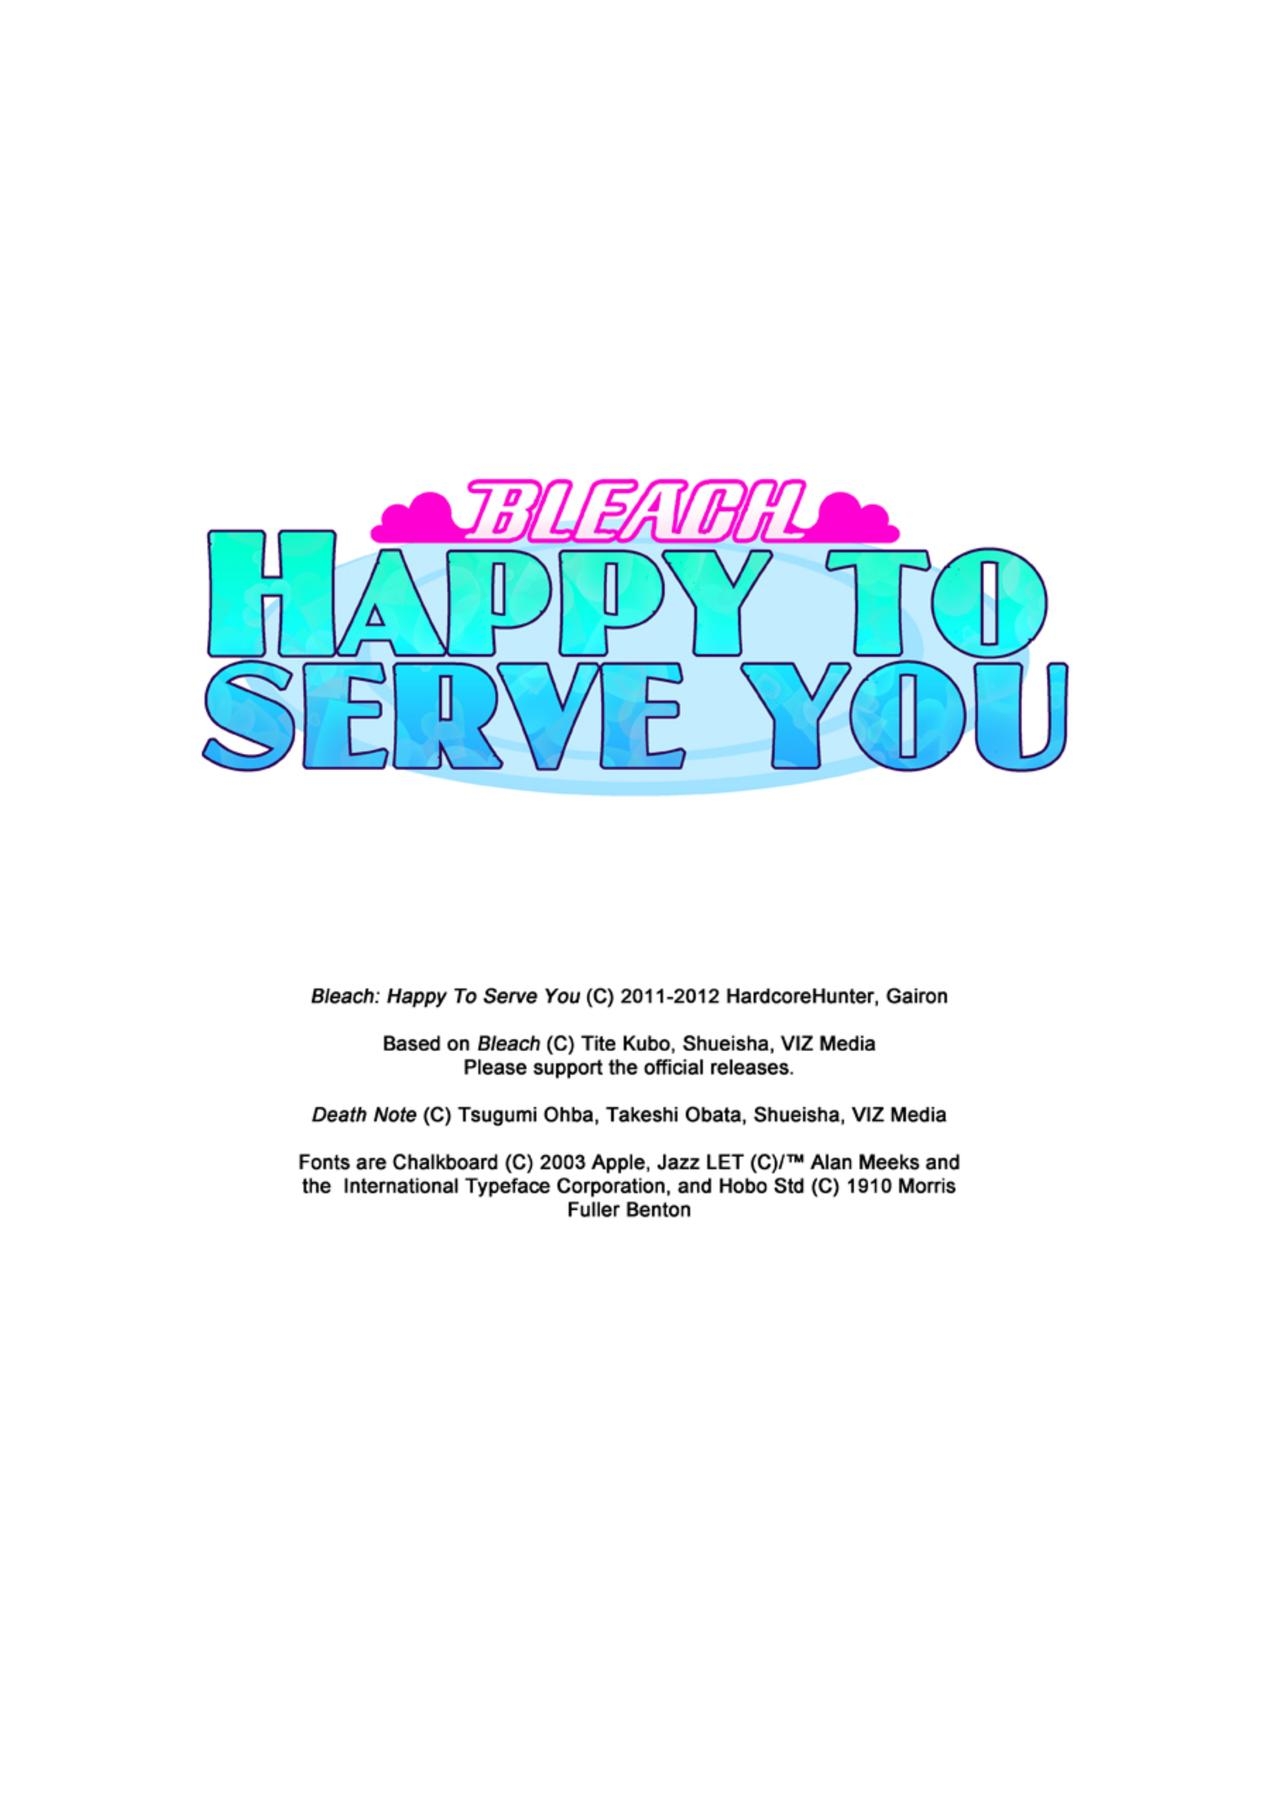 [Gairon] Happy to Serve You - Chapter 2 (Bleach) 1